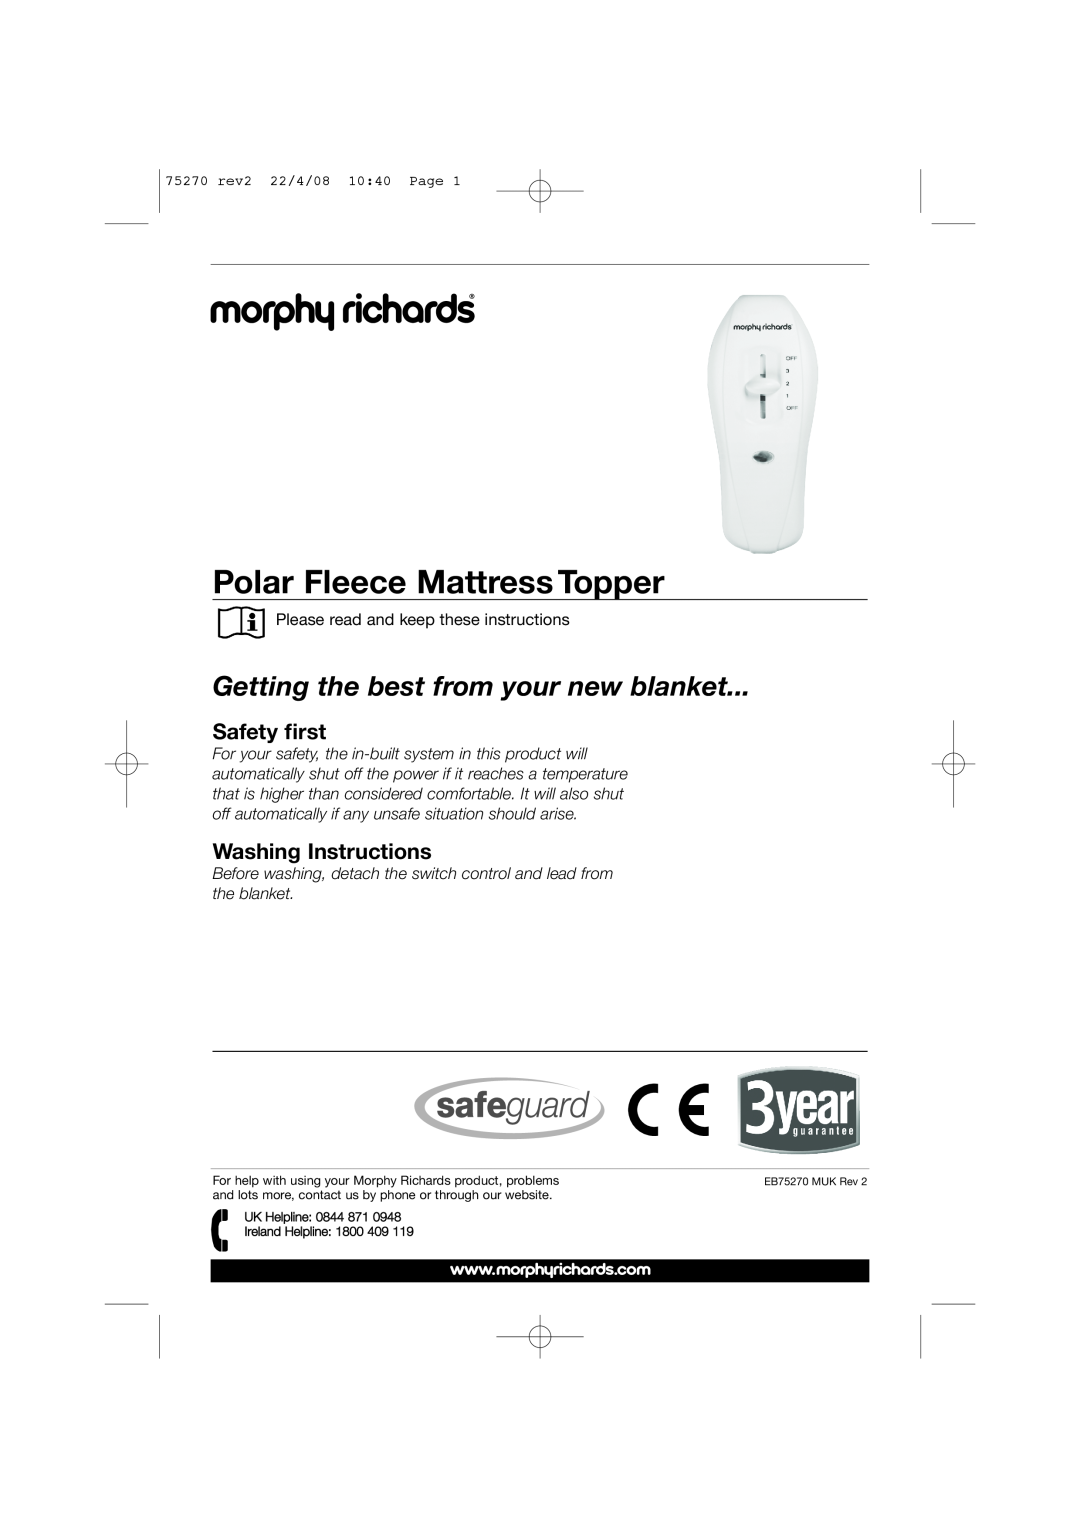 Morphy Richards EB75270 manual Polar Fleece Mattress Topper, Getting the best from your new blanket, Safety first 